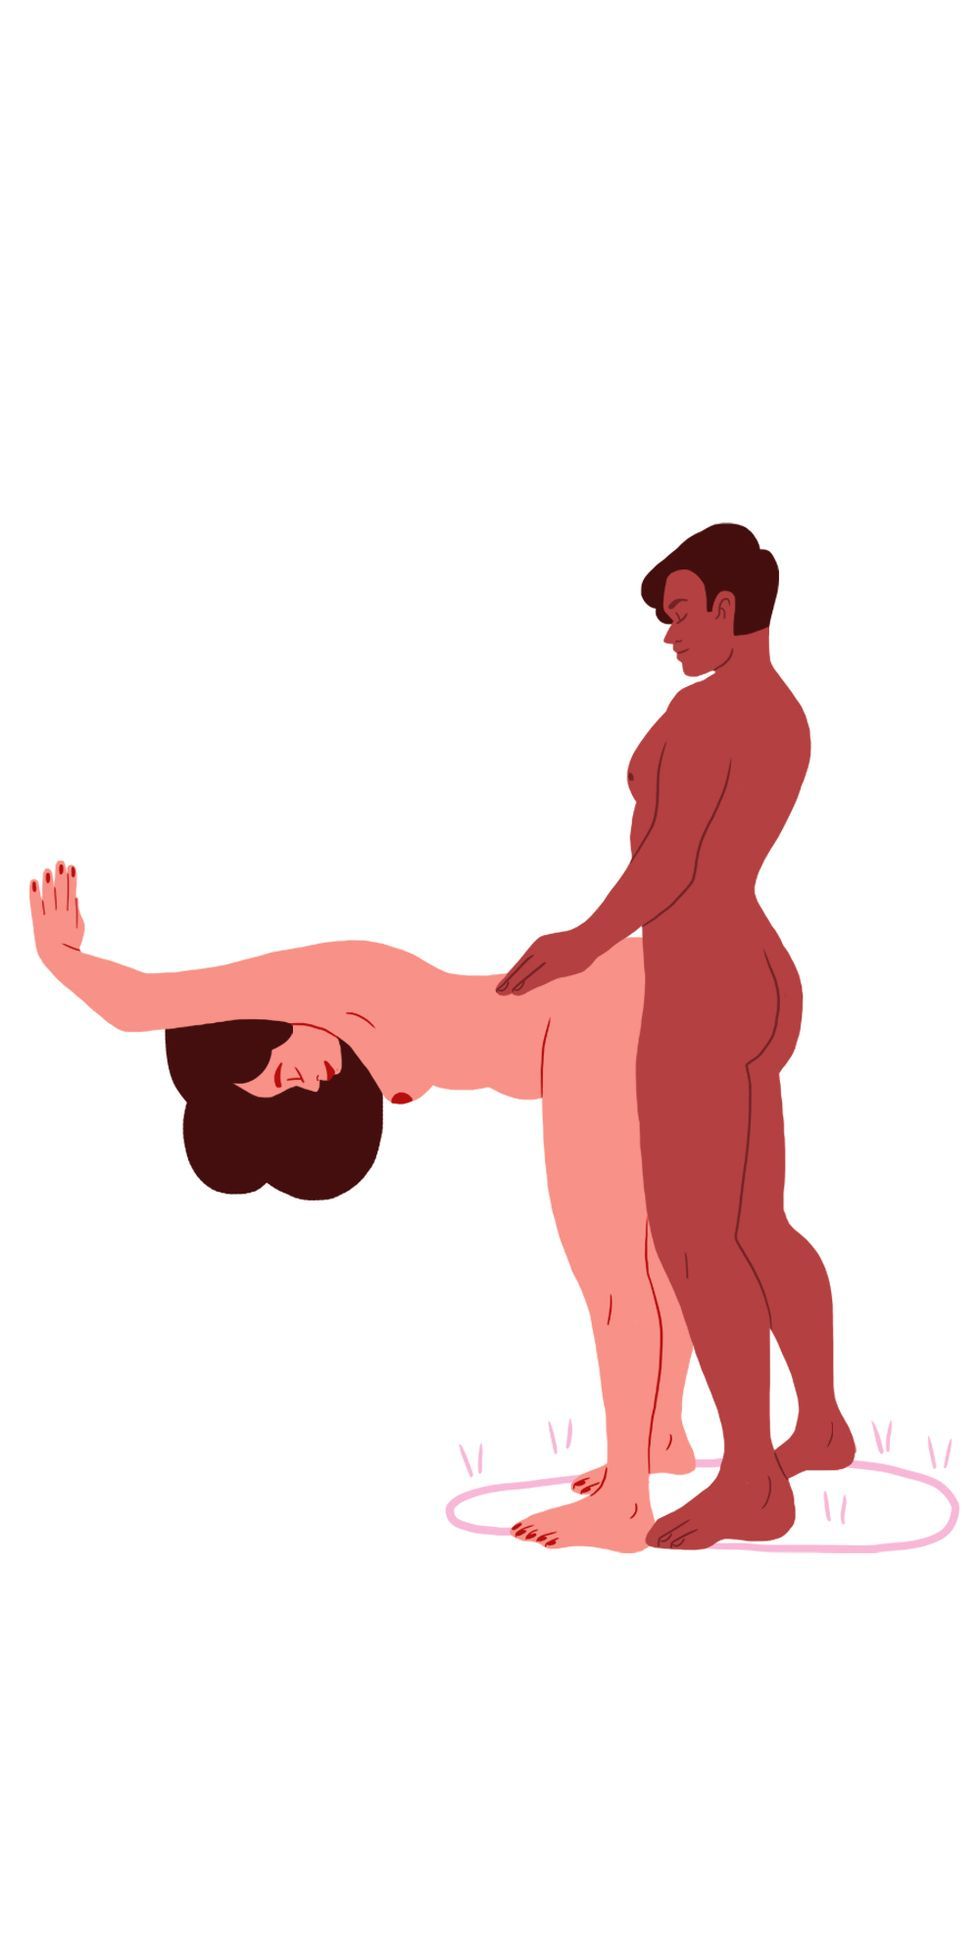 Shower Sex Positions - 16 Best Shower Sex Positions - How to Have Sex in the Shower